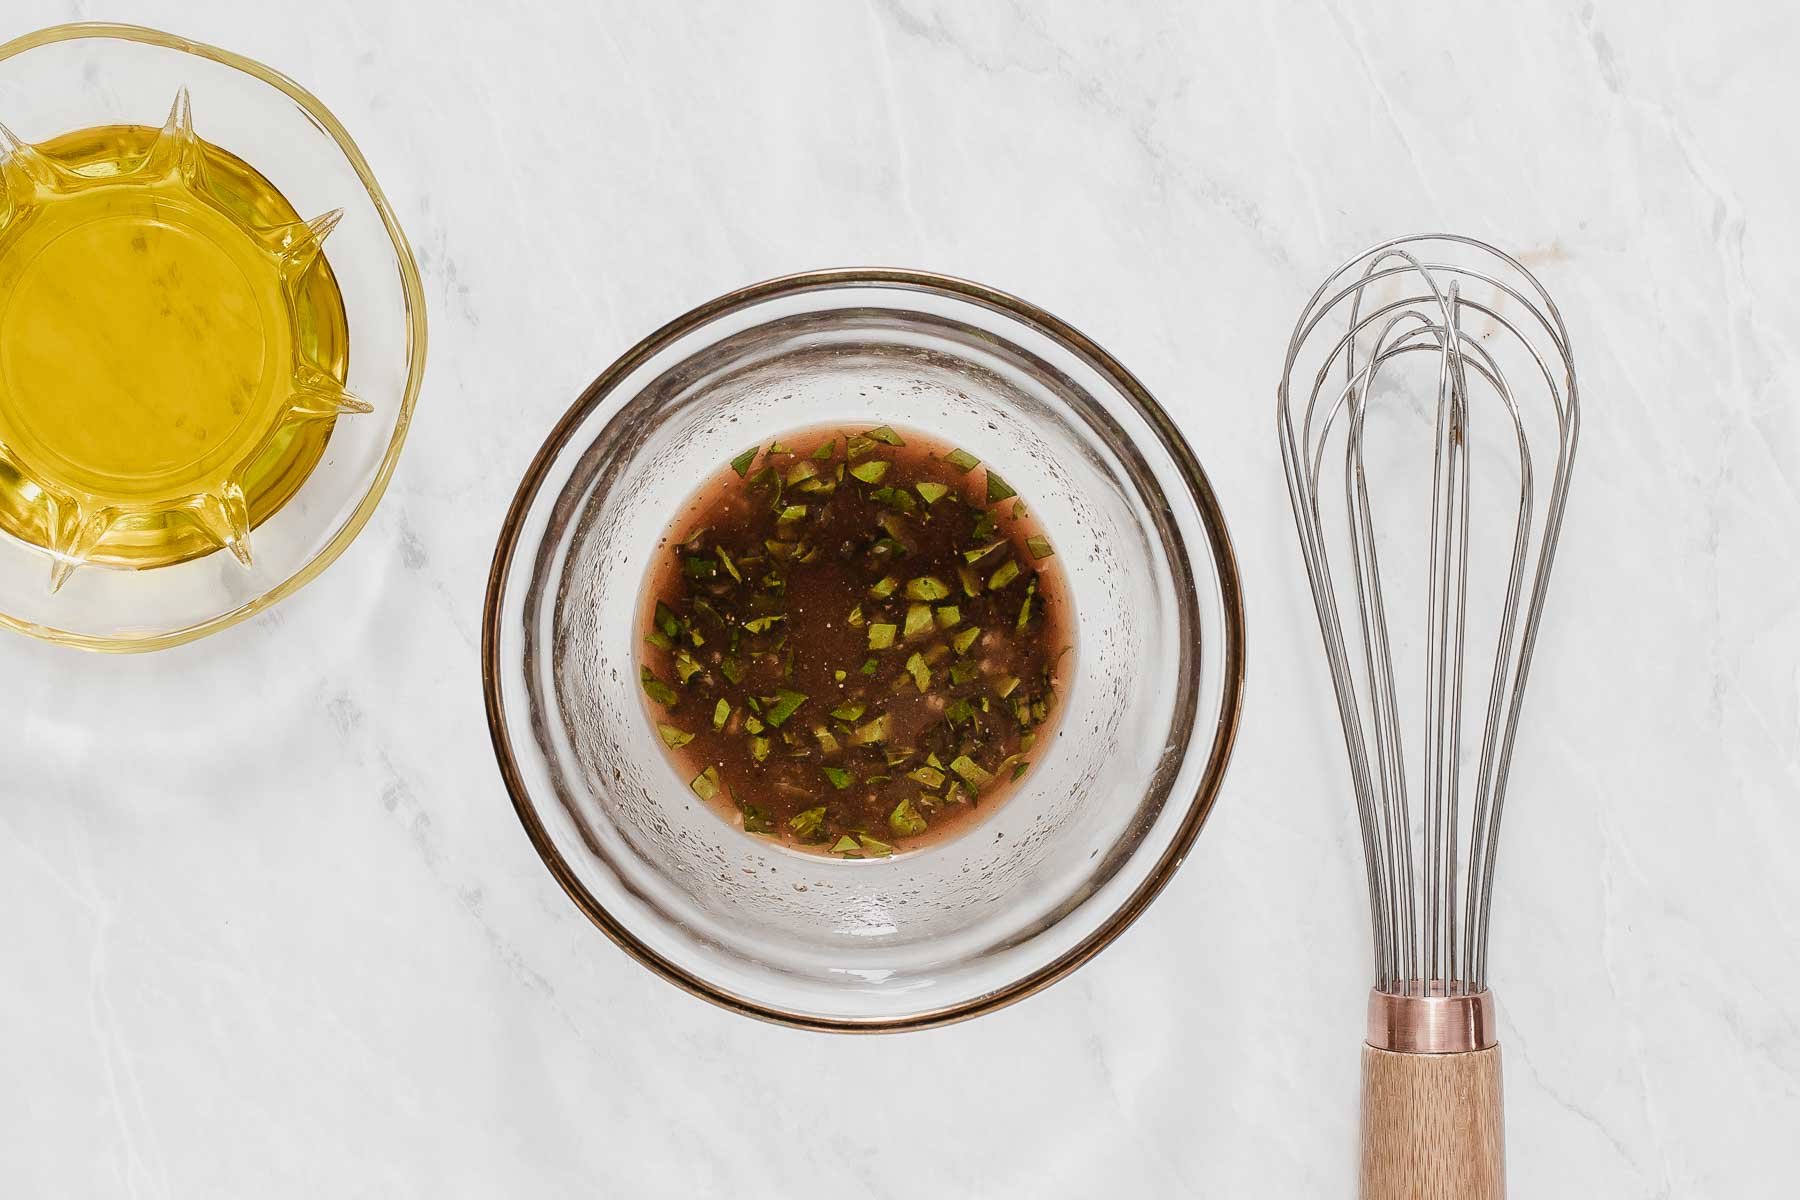 Brown vinaigrette in small bowl with whisk on the side.